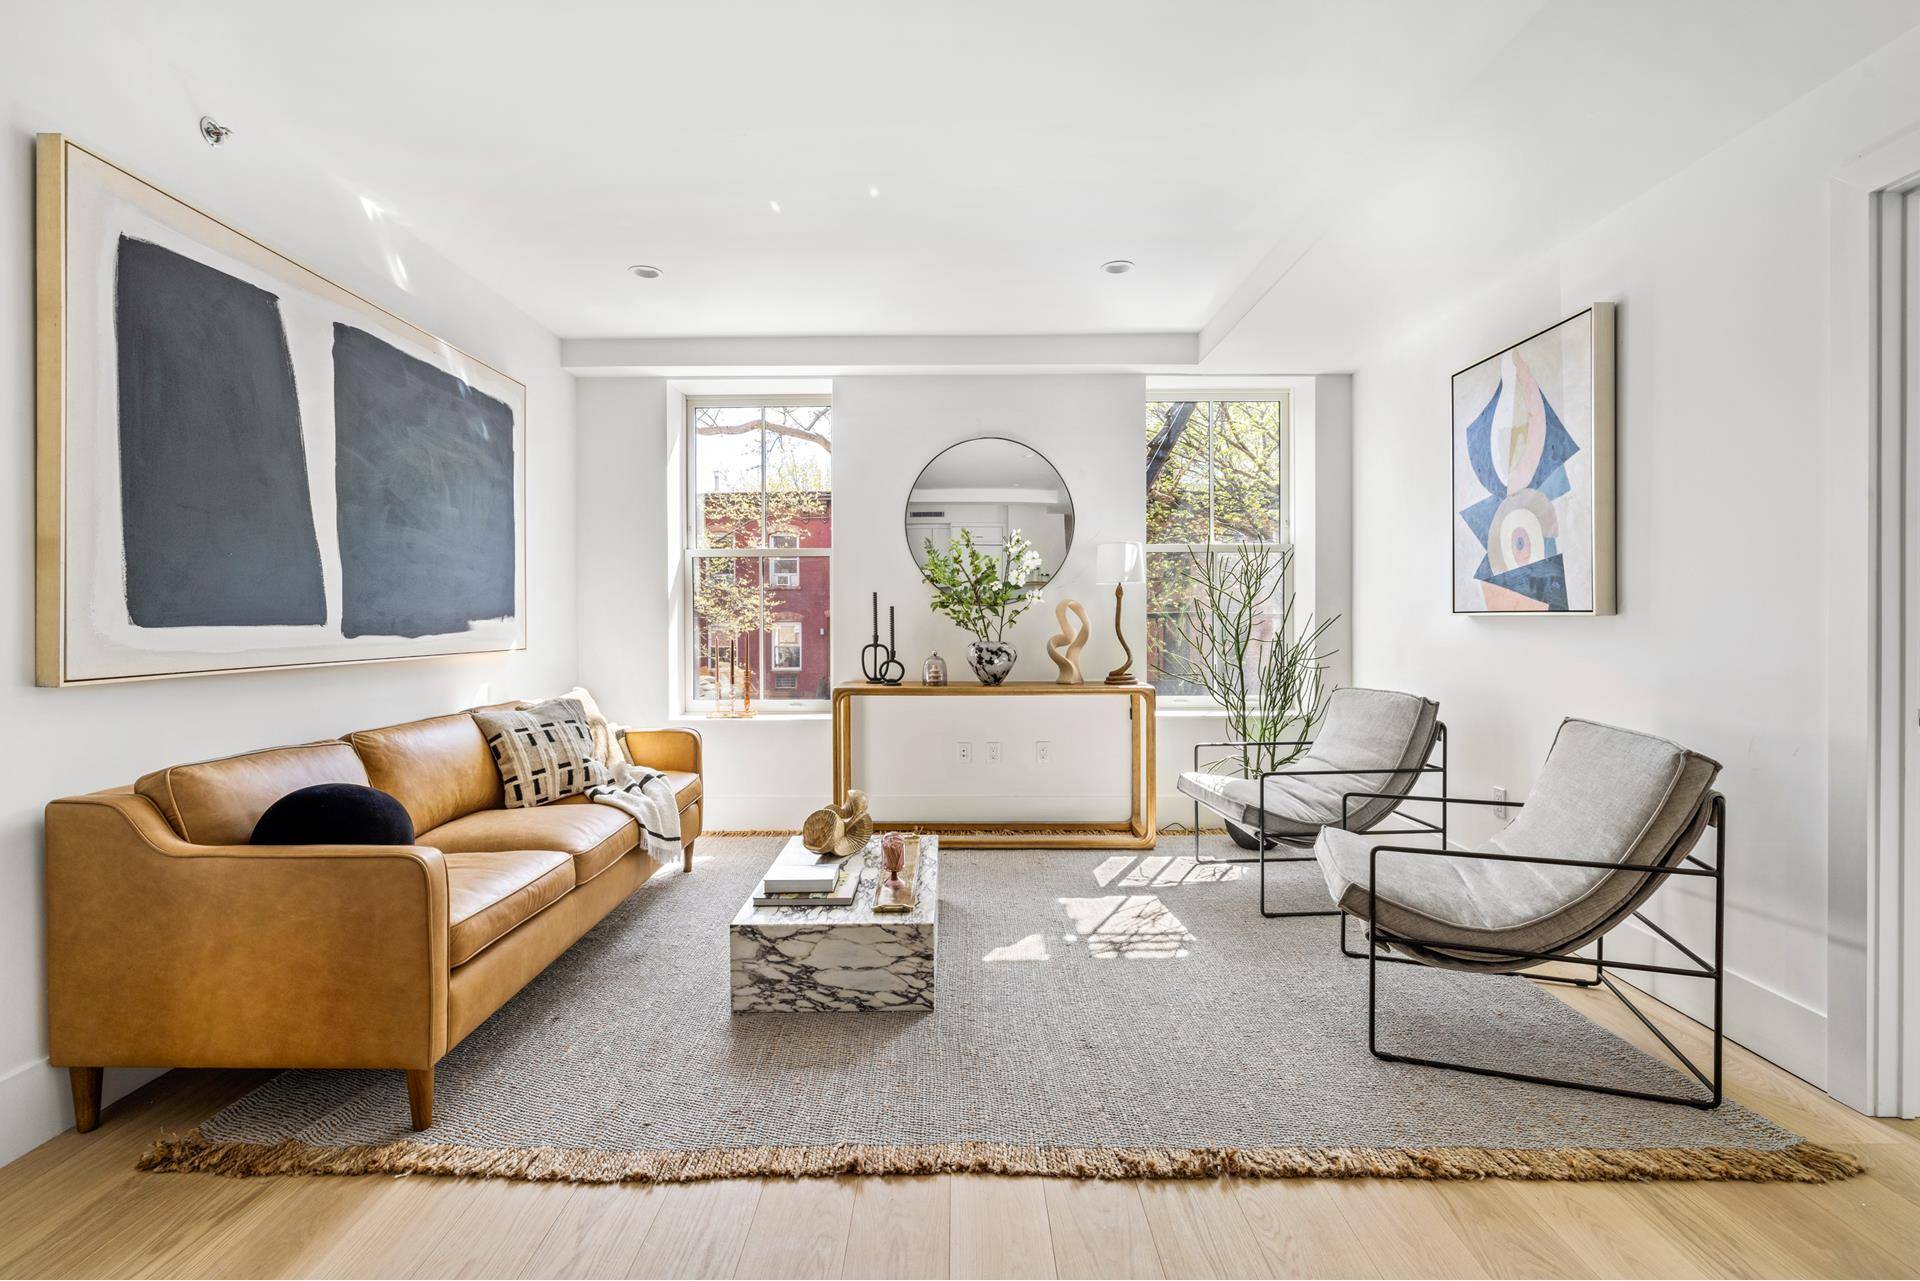 Situated at the crossroads of classic Brooklyn neighborhoods namely Boerum Hill, Cobble Hill and Carroll Gardens, 85 Douglass Street provides direct access to some of the most established cultural institutions, ...